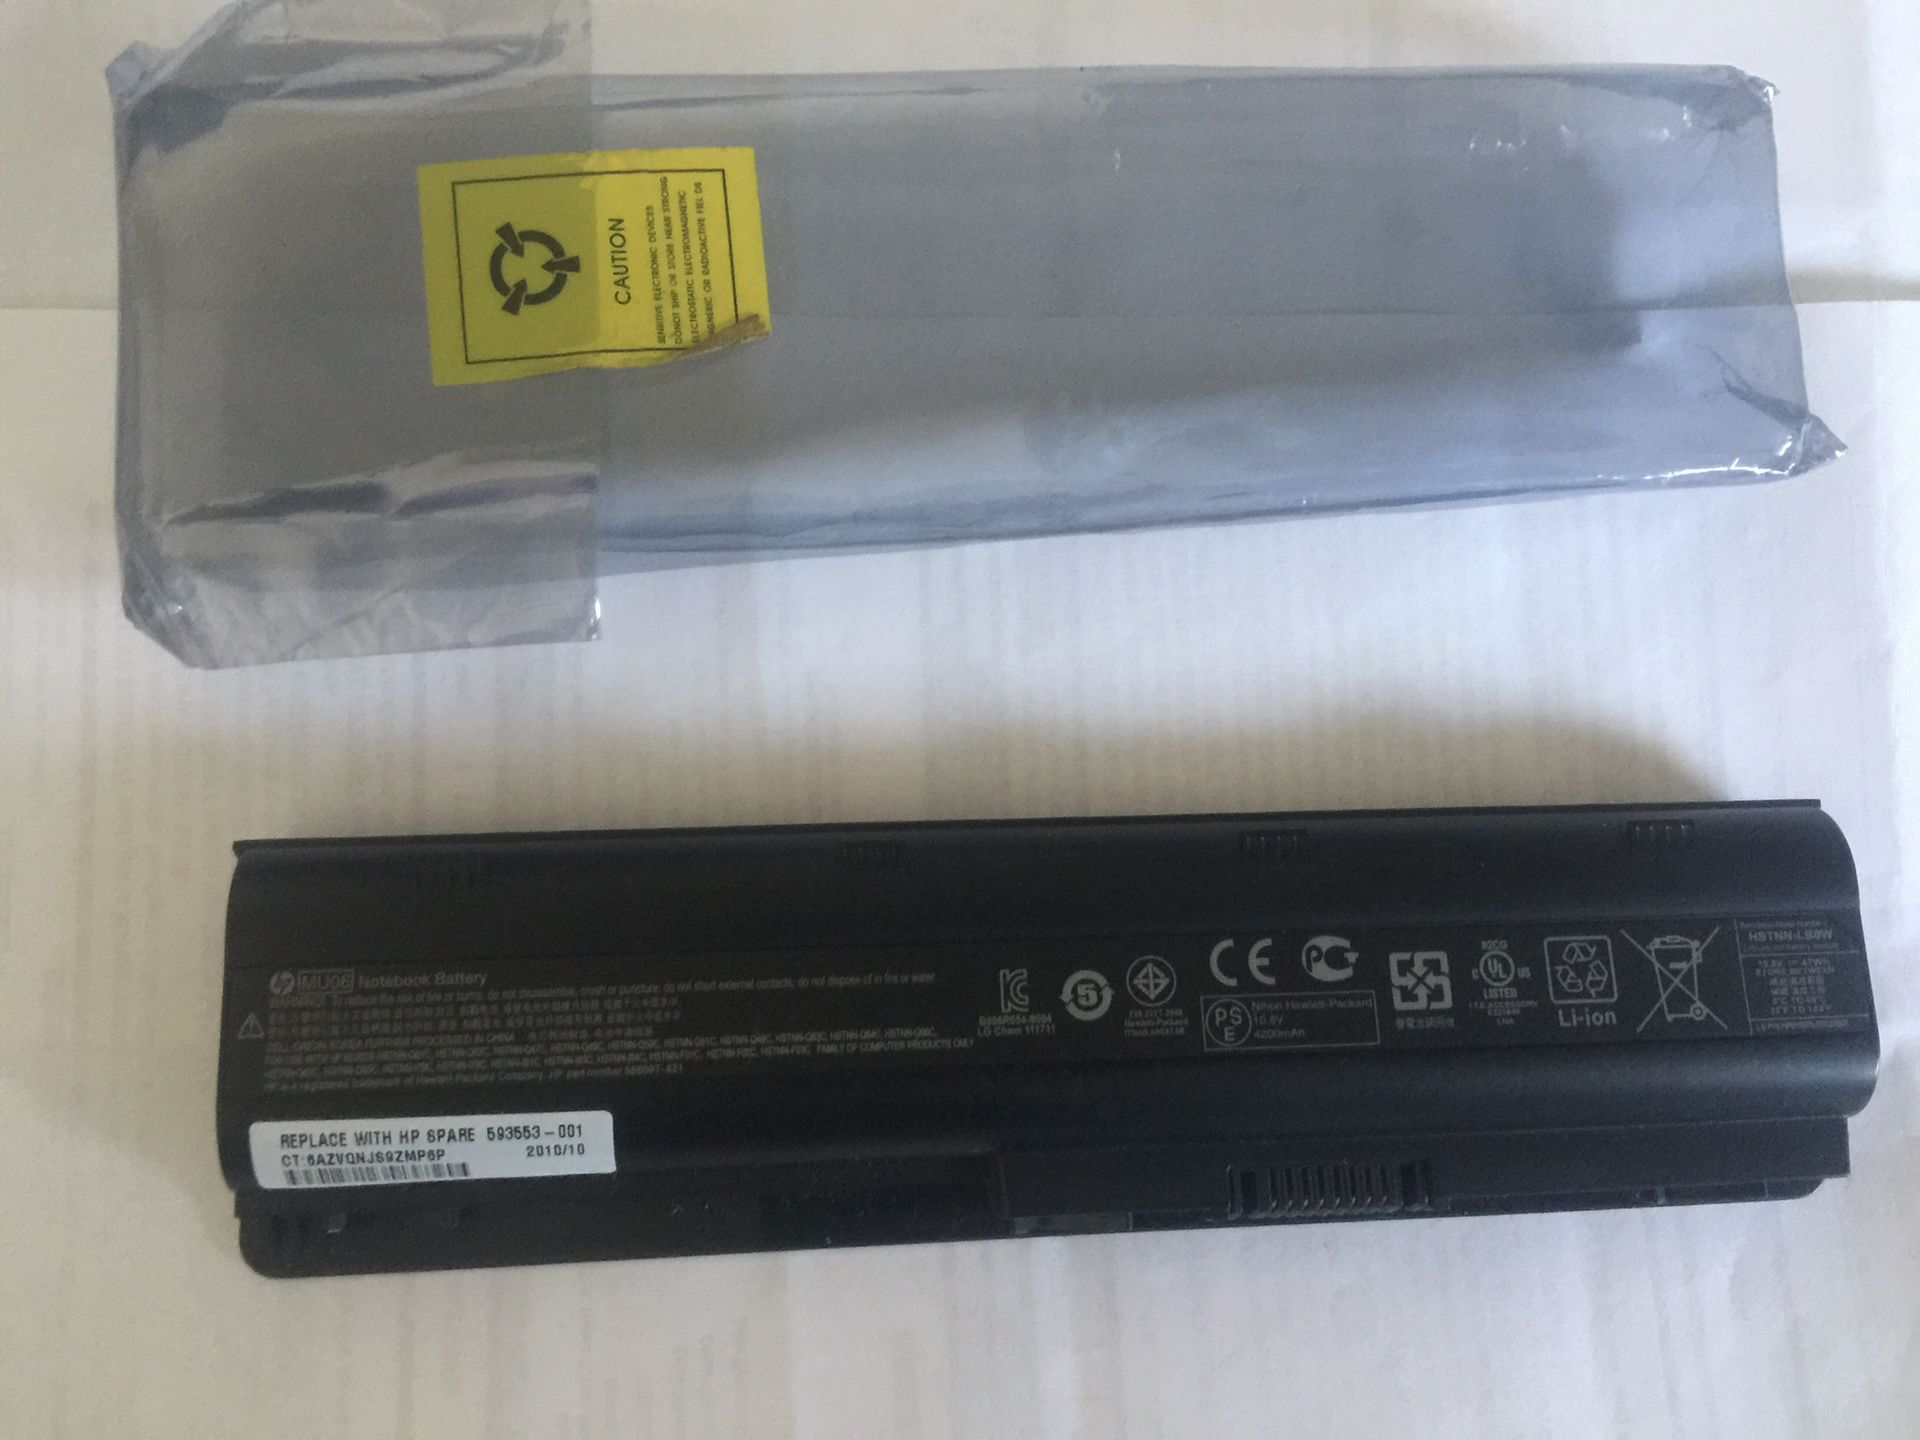 MU06 Replacement NoteBook Battery for HP